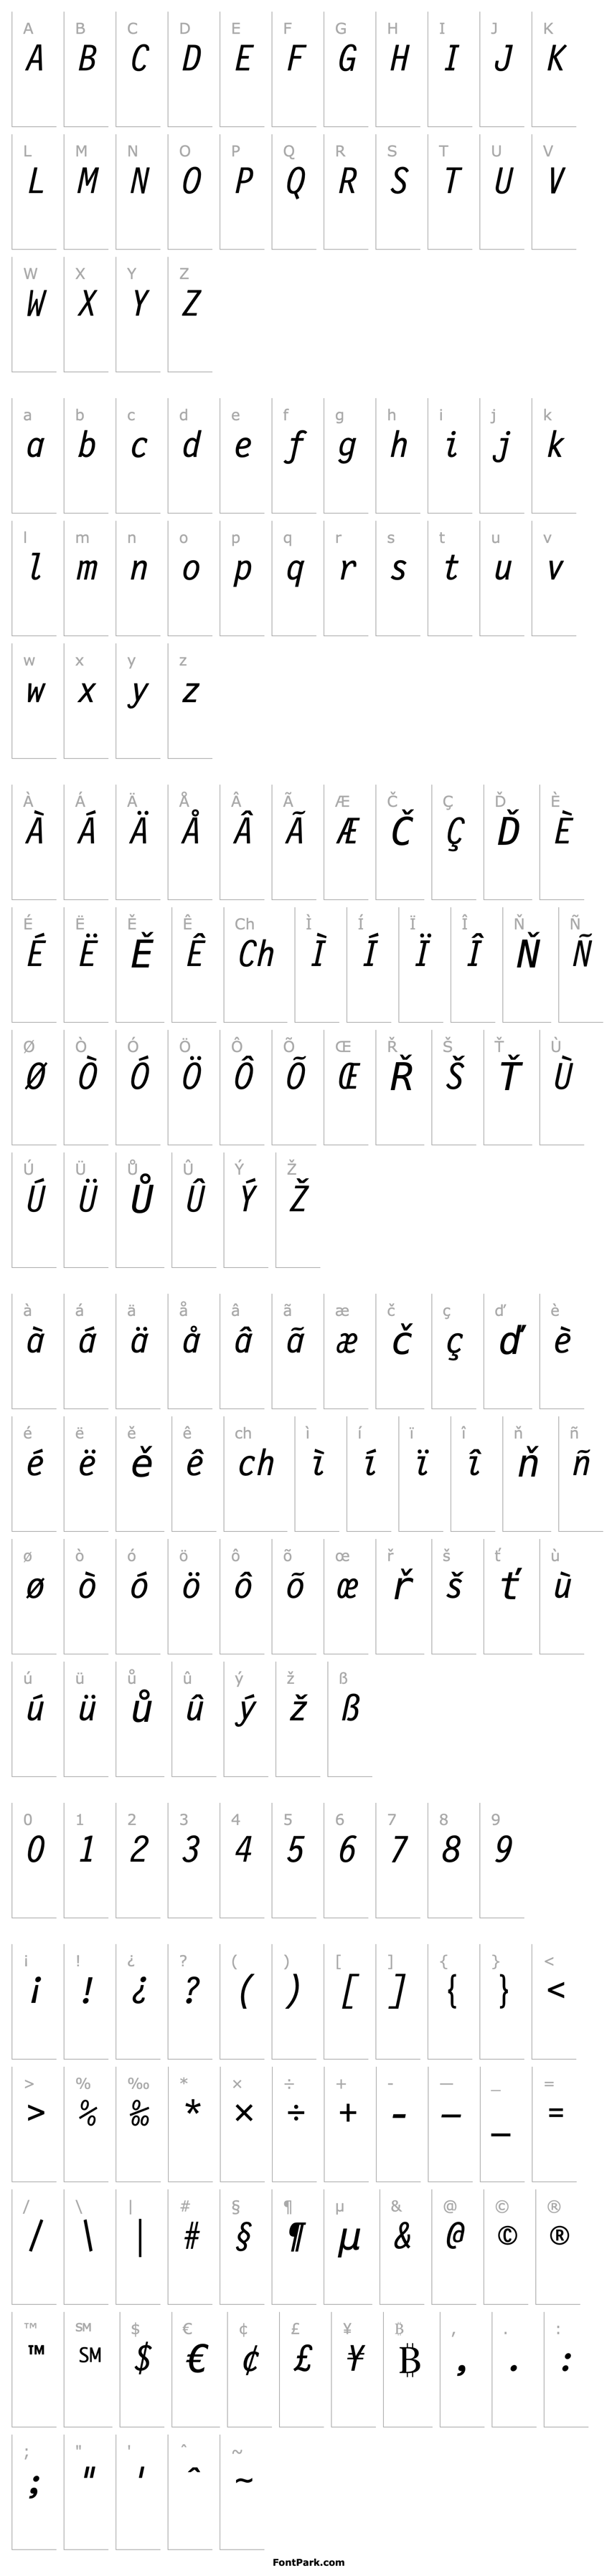 Overview LetterGothic12PitchBT-Italic